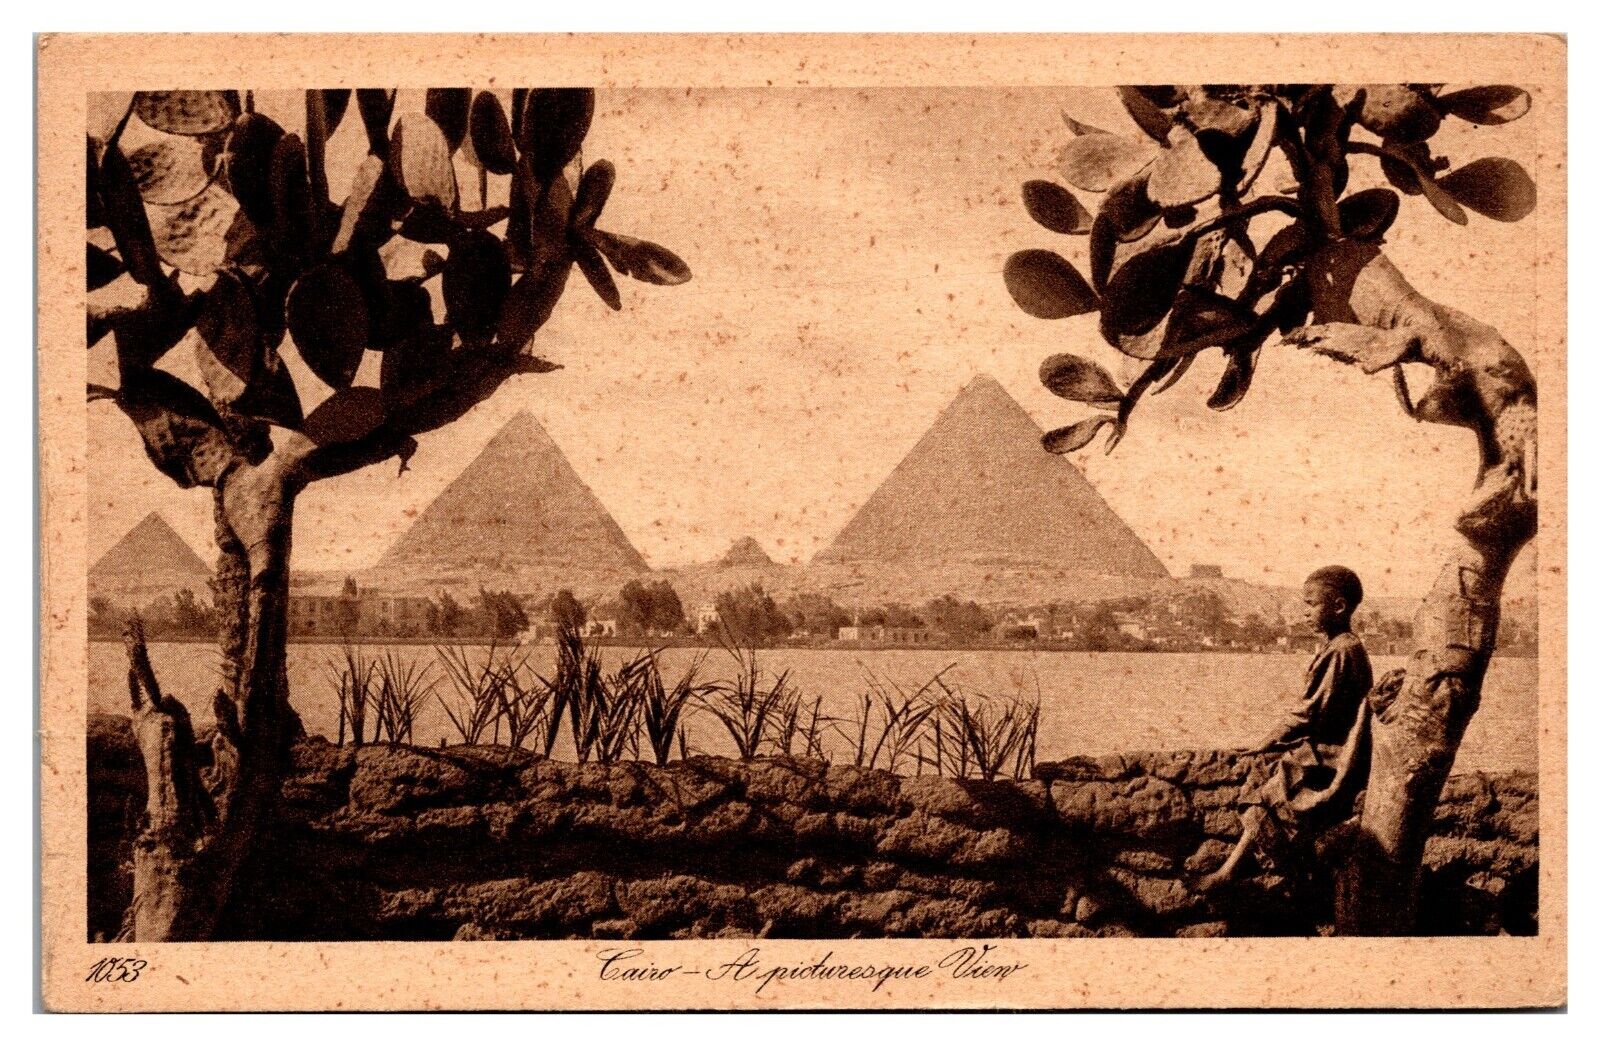 ANTQ Cairo-A Picturesque View, The Great Pyramids, Little Boy, Egypt Postcard